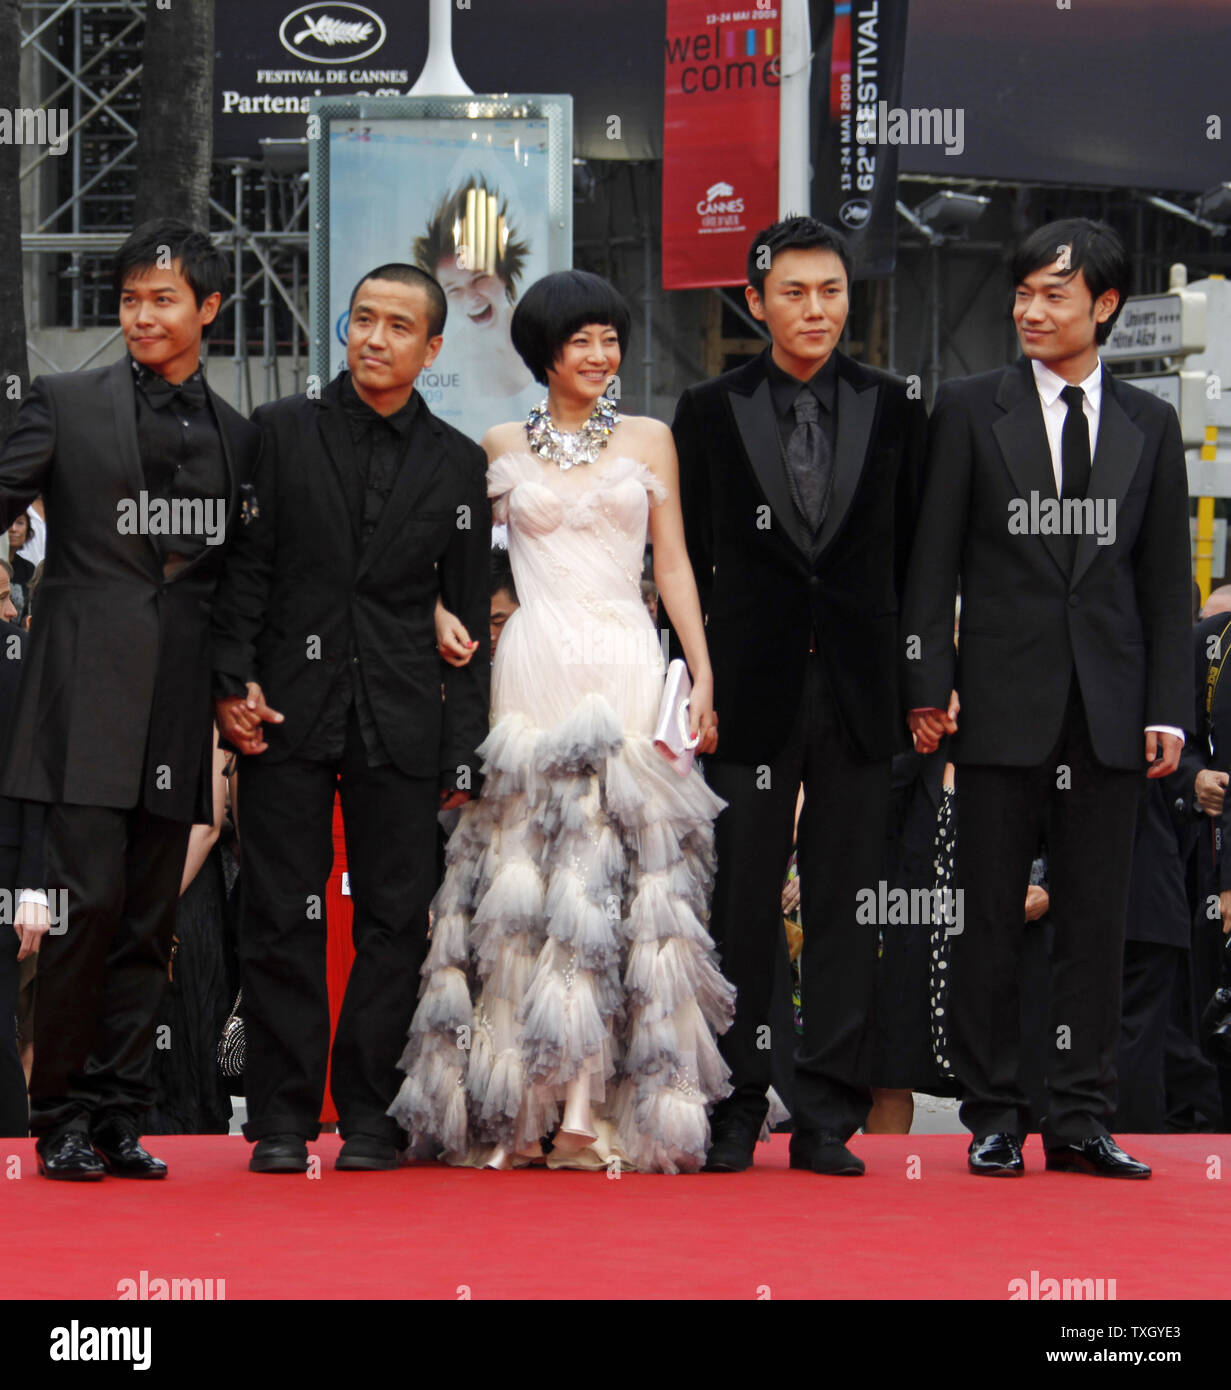 Actor Chen Sicheng, director Lou Ye, actress Tan Zhuo and actors Qin Hao and Wu Wei arrive on the red carpet before a screening of the Chinese film 'Spring Fever' at the 62nd annual Cannes Film Festival in Cannes, France on May 14, 2009.   (UPI Photo/David Silpa) Stock Photo